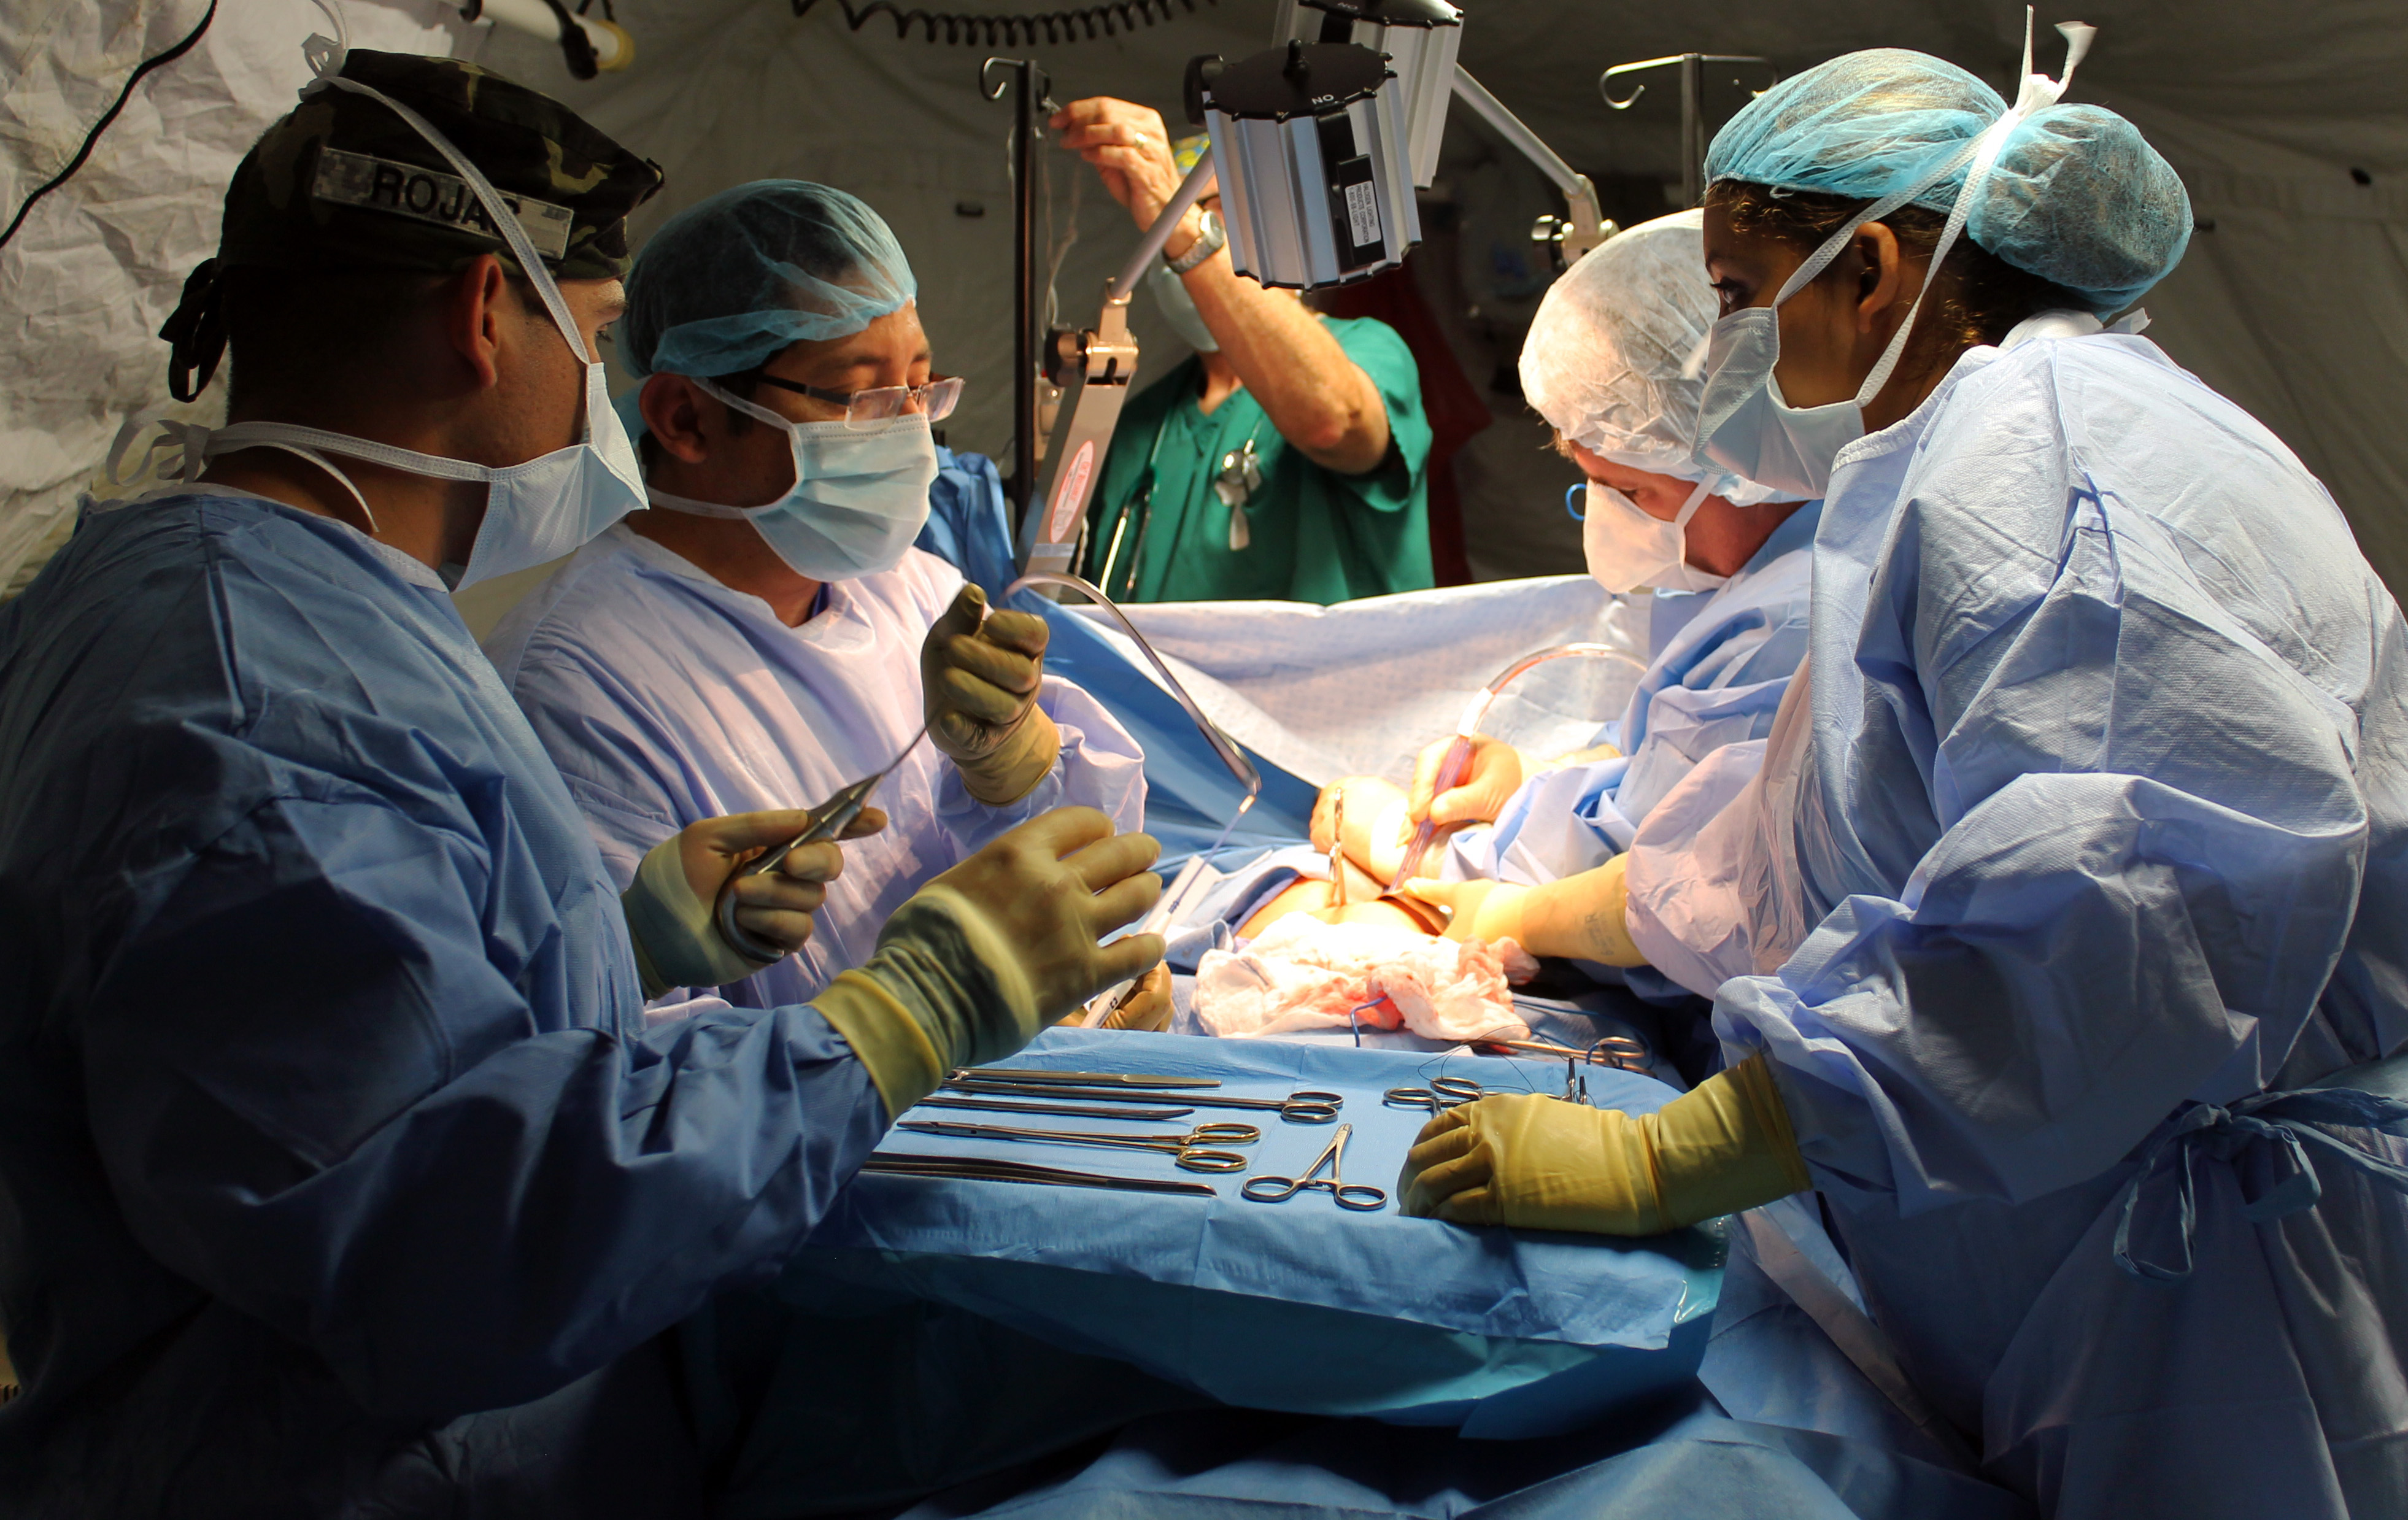 Surgical care in Honduras